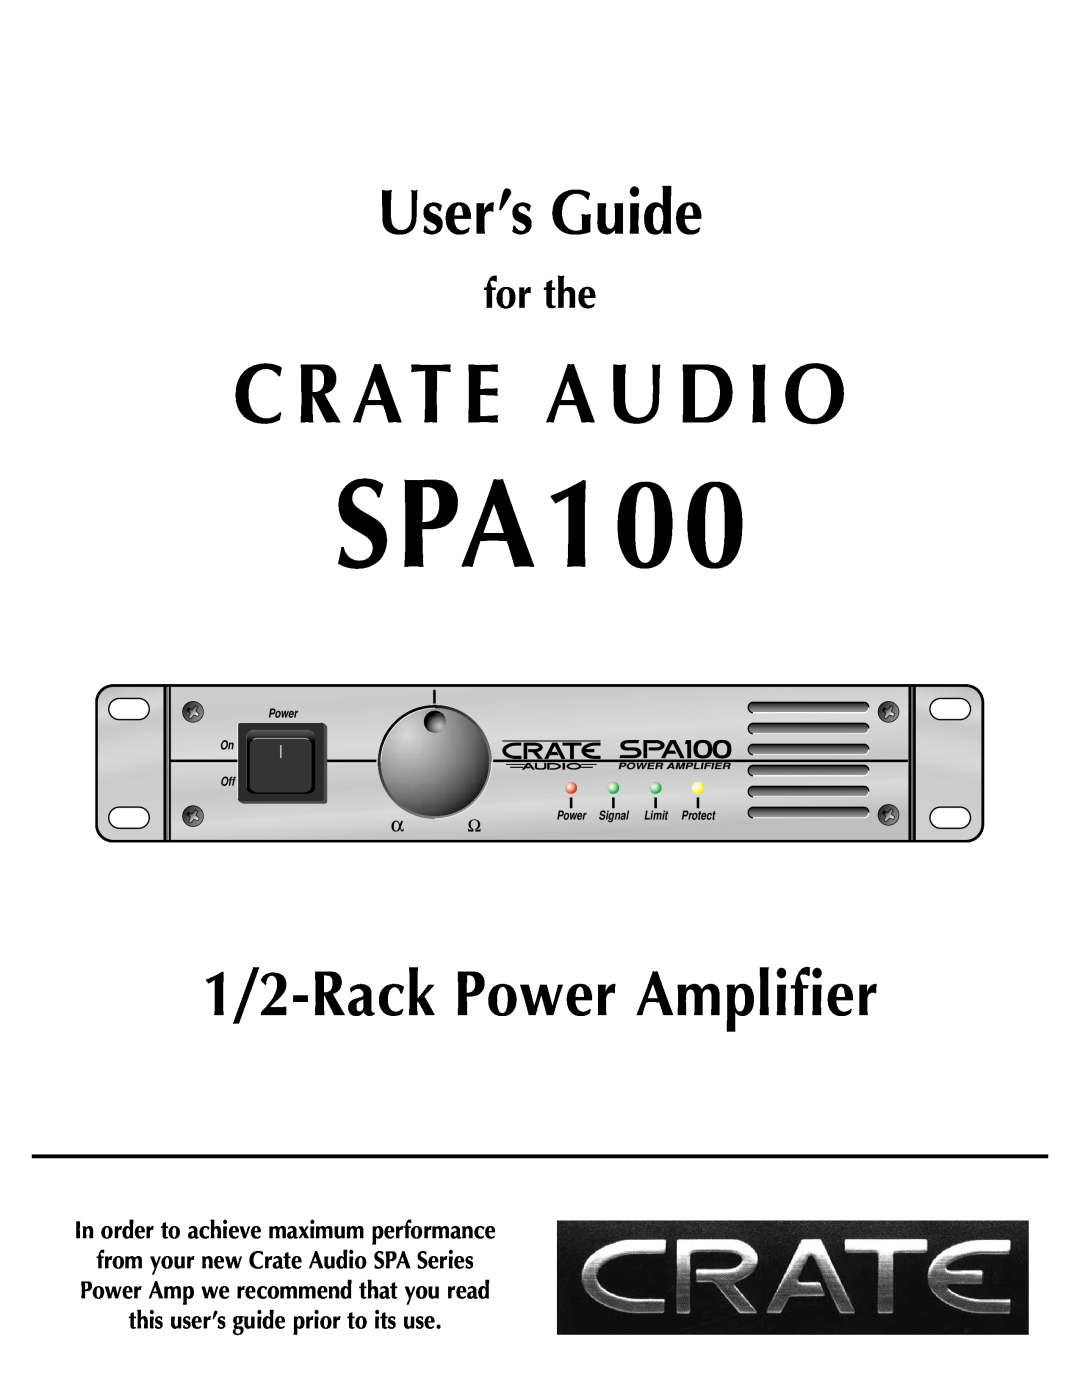 Crate Amplifiers SPA100 manual In order to achieve maximum performance, C R At E A U D I O, User’s Guide, for the 